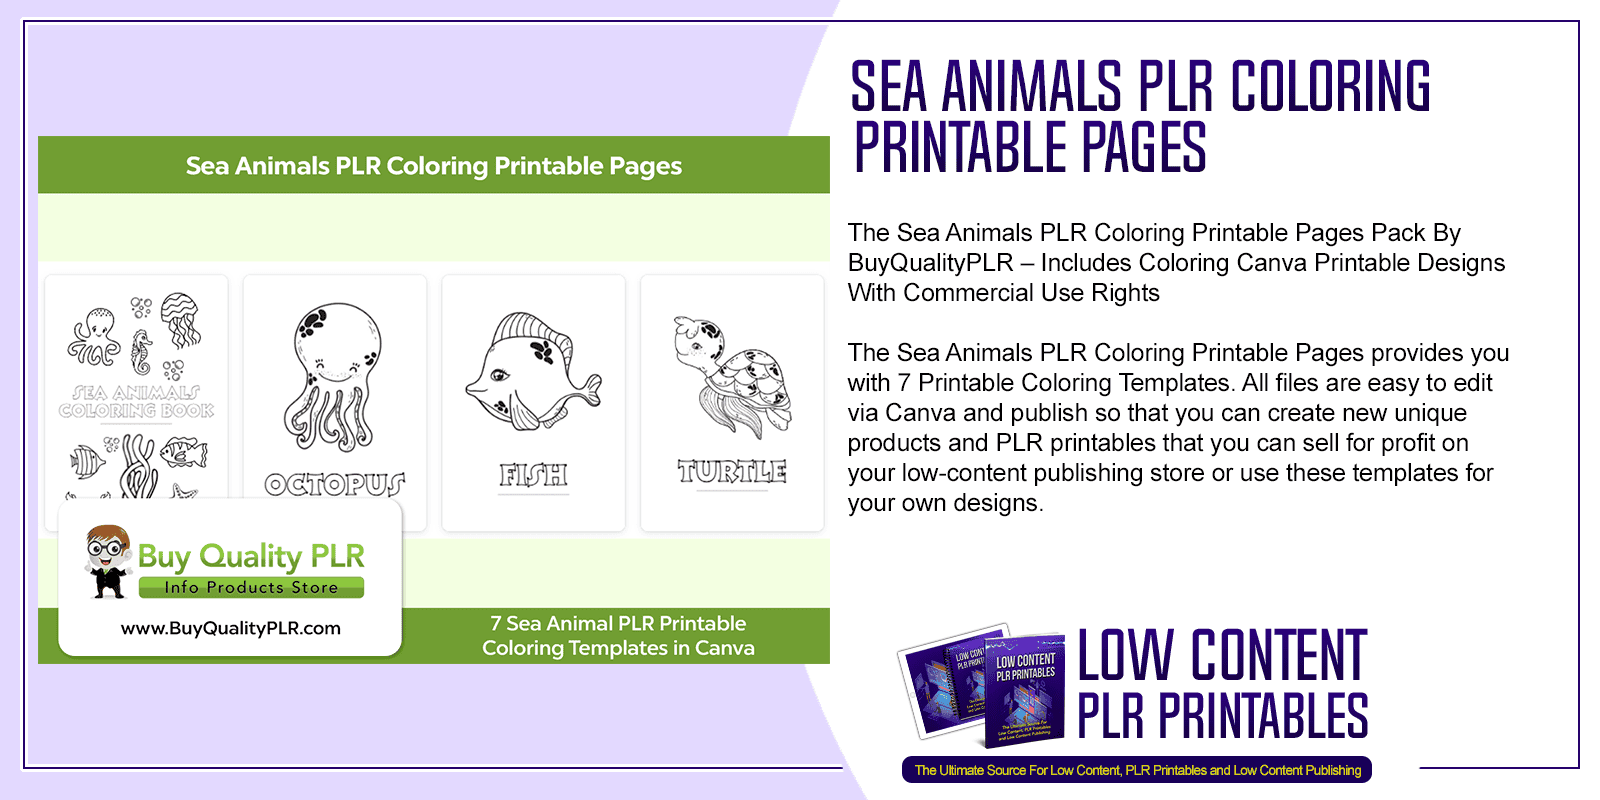 Sea Animals PLR Coloring Printable Pages